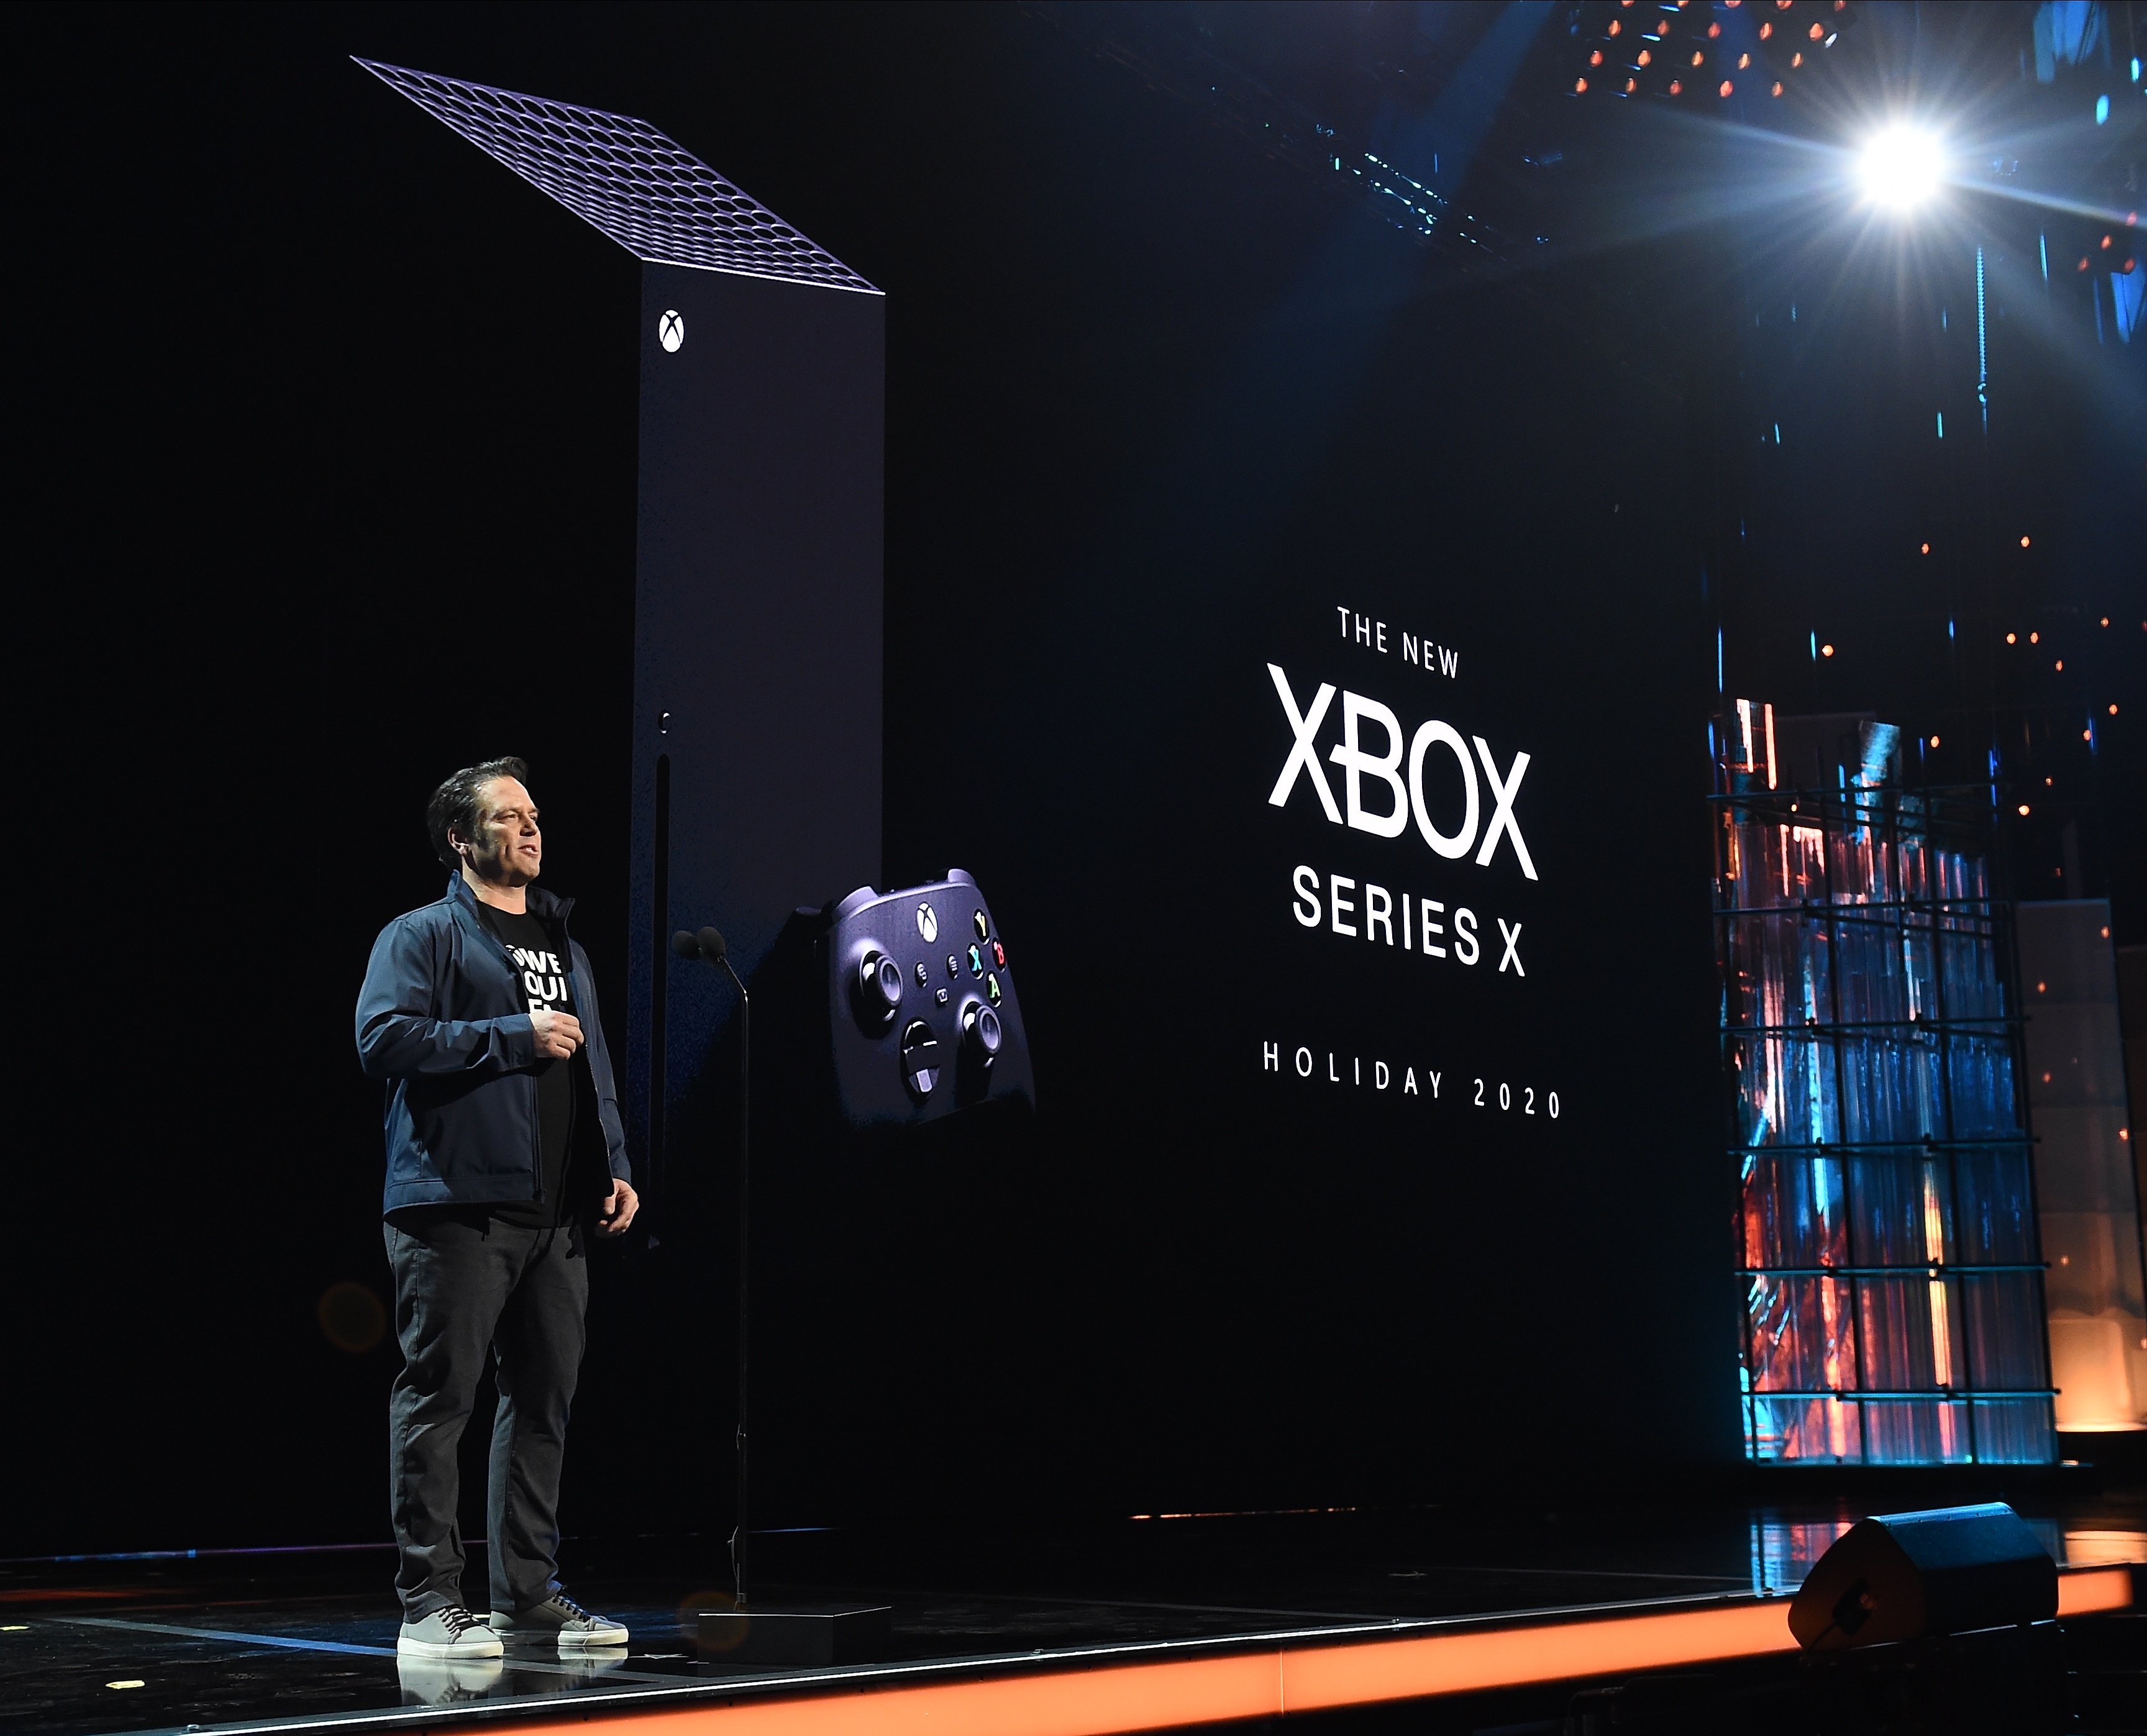 LOS ANGELES- DECEMBER 12: Head of Xbox, Phil Spencer, unveils the new Xbox Series X alongside Senua’s Saga: Hellblade II at The Game Awards 2019 at the Microsoft Theater on December 12, 2019 in Los Angeles, California. (Photo by Frank Micelotta/PictureGroup)